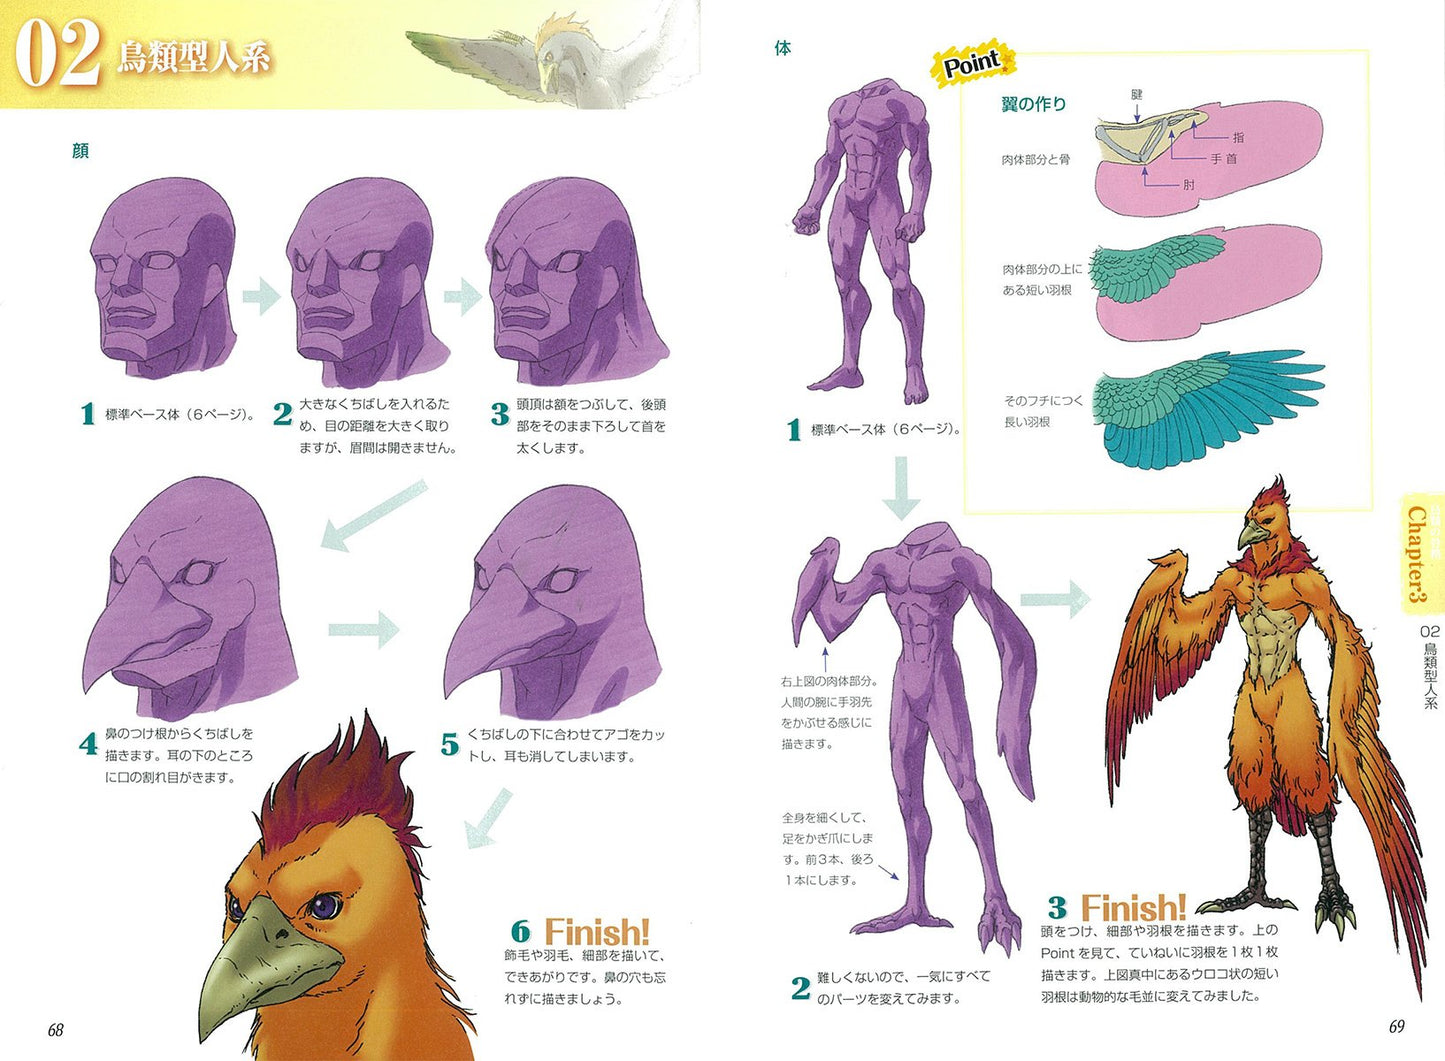 How to draw a creature that thinks by combining people and animals